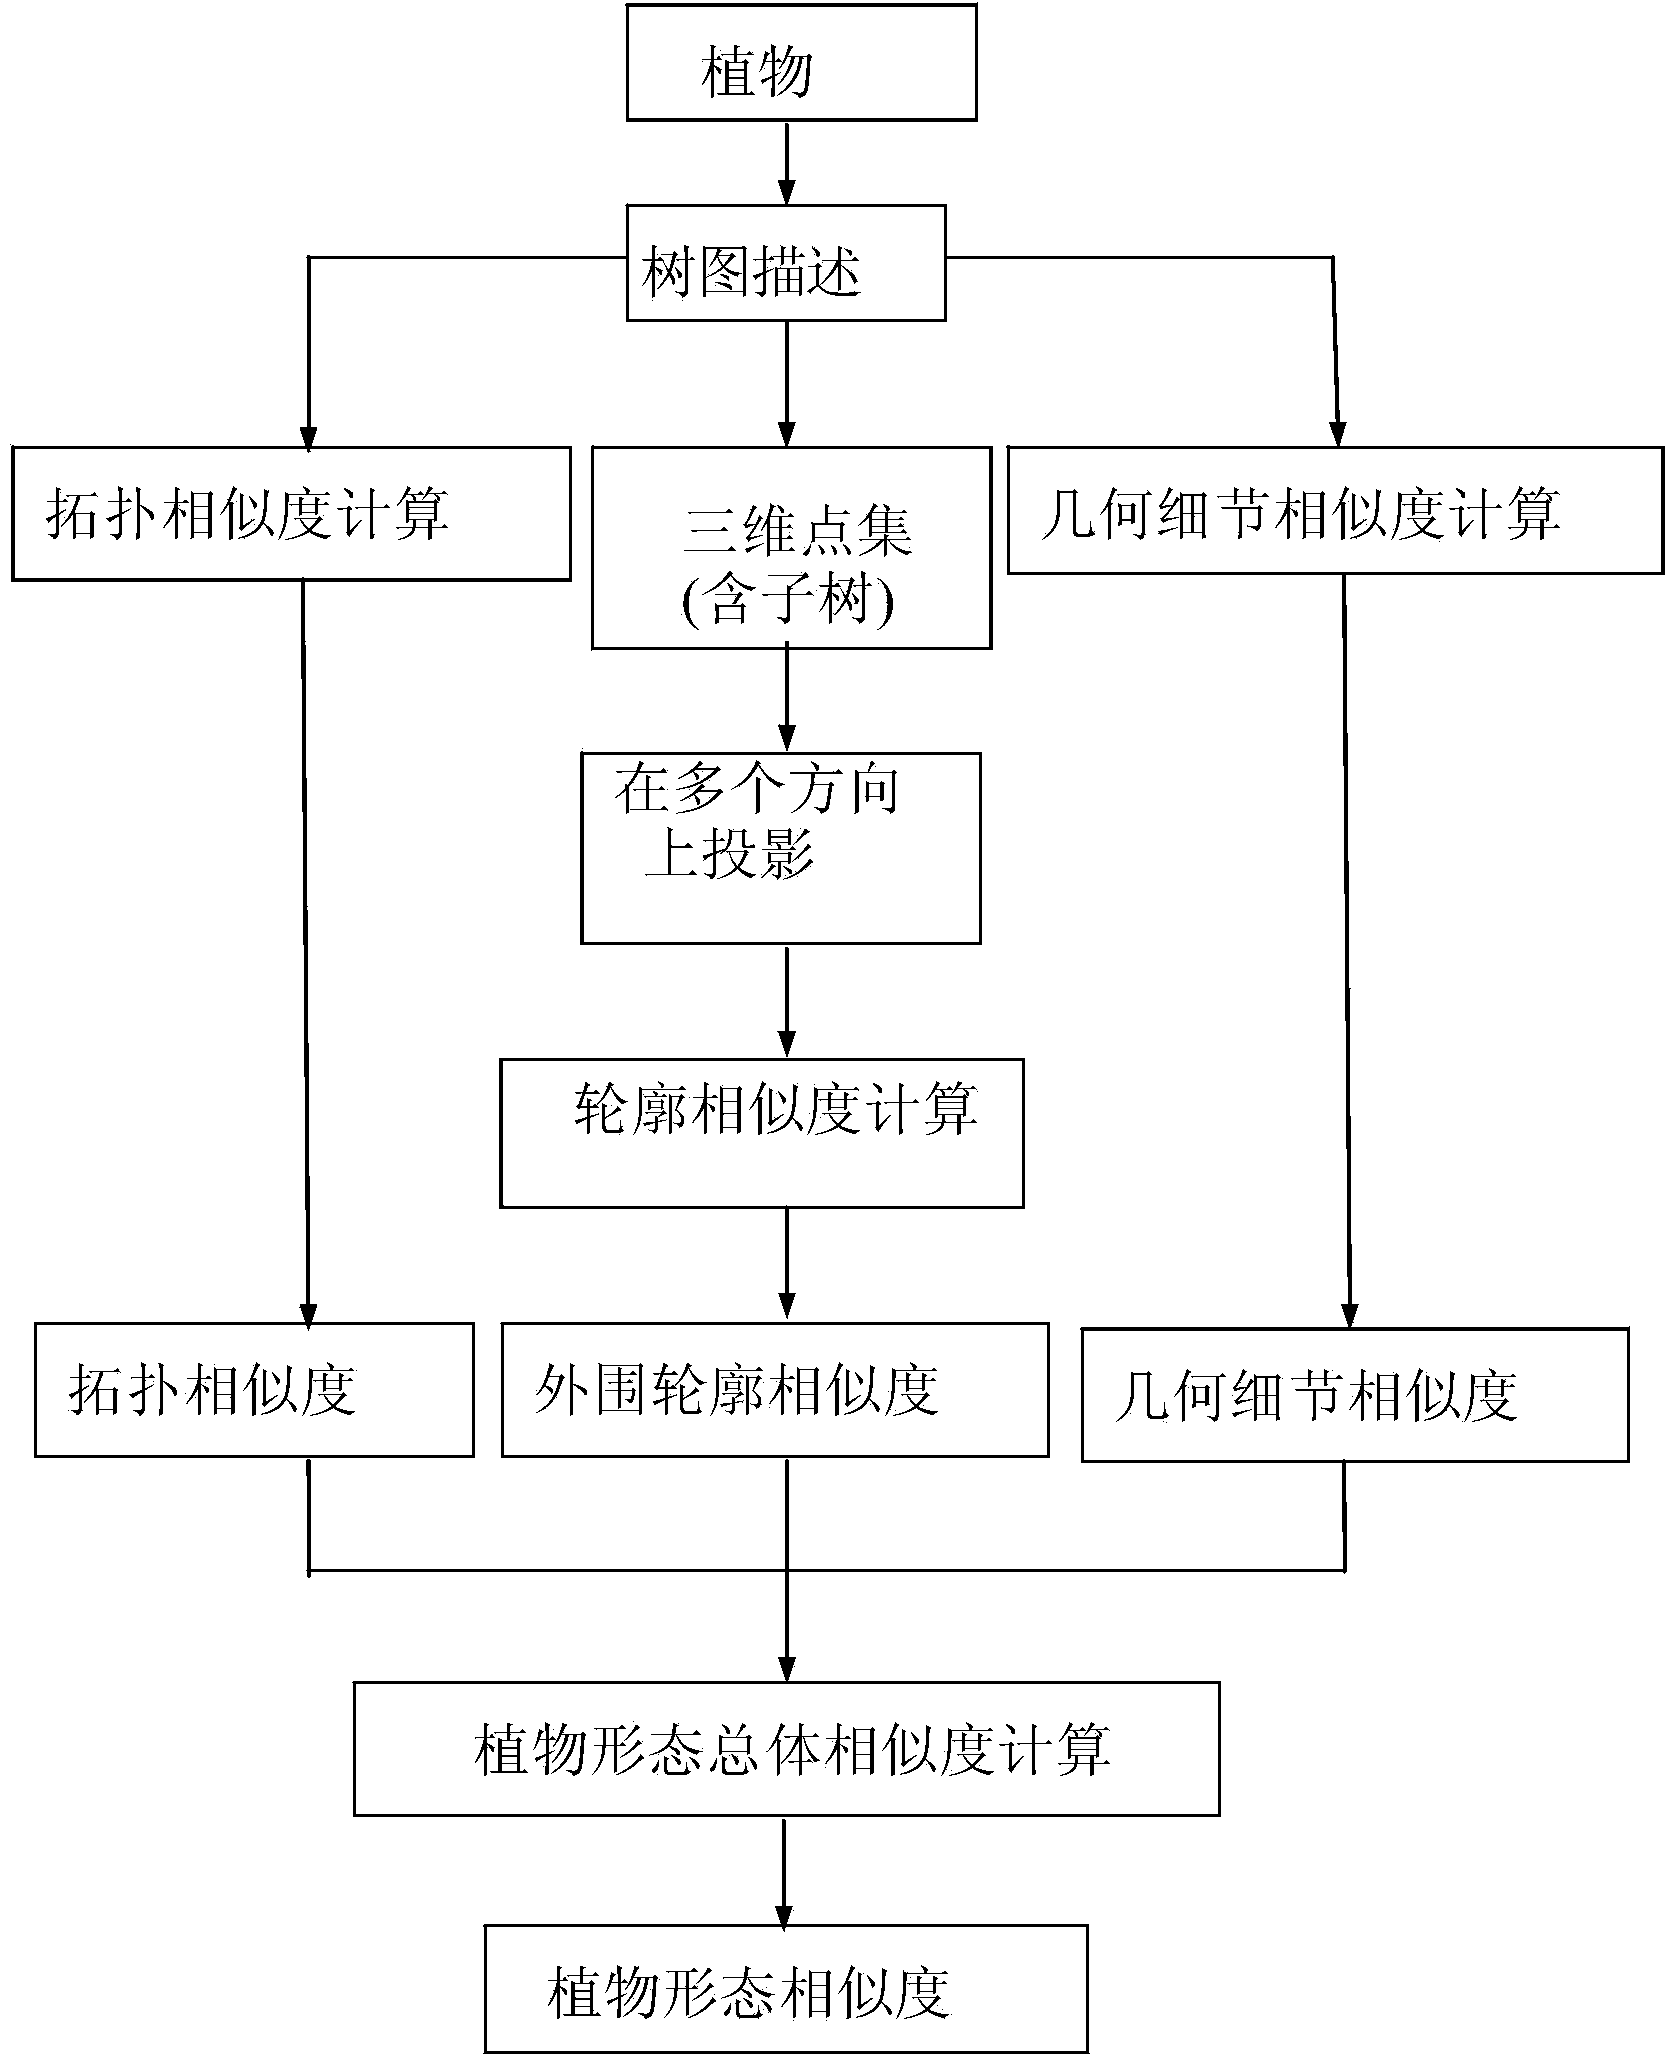 Computer method for comparing similarity of different plant forms